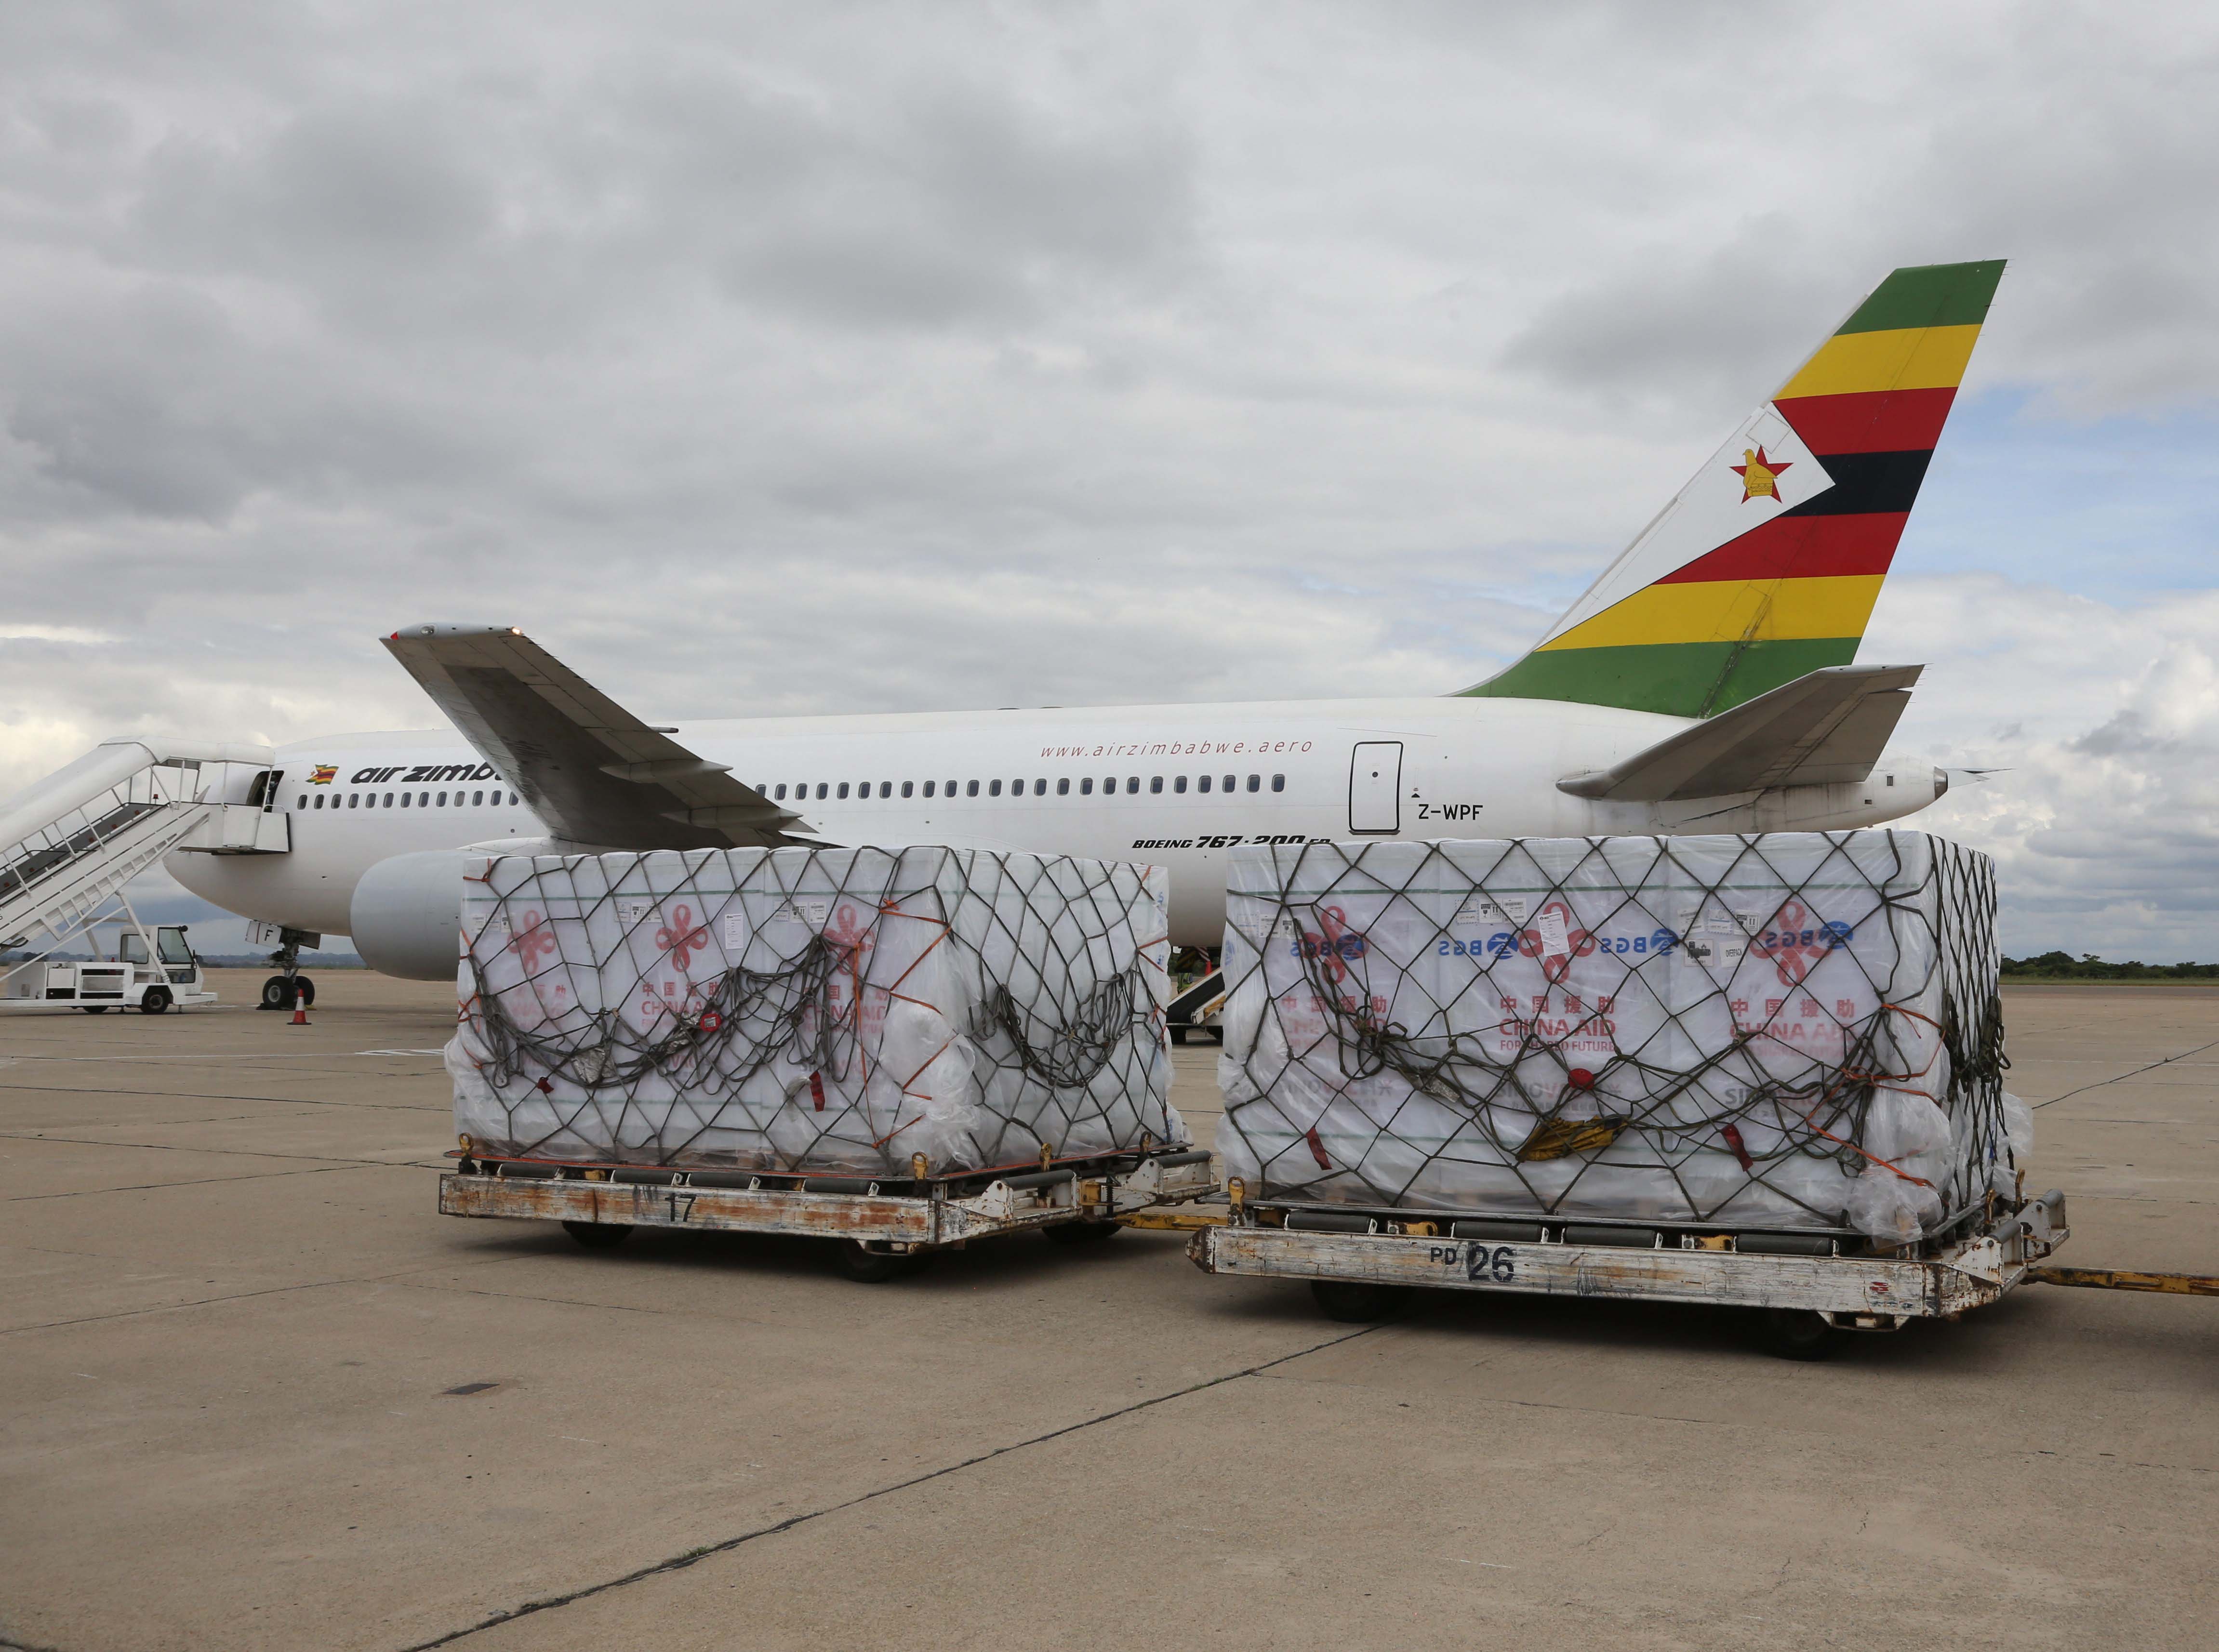 Zimbabwe receives latest vaccine donation from China amid 4th wave of COVID-19 pandemic